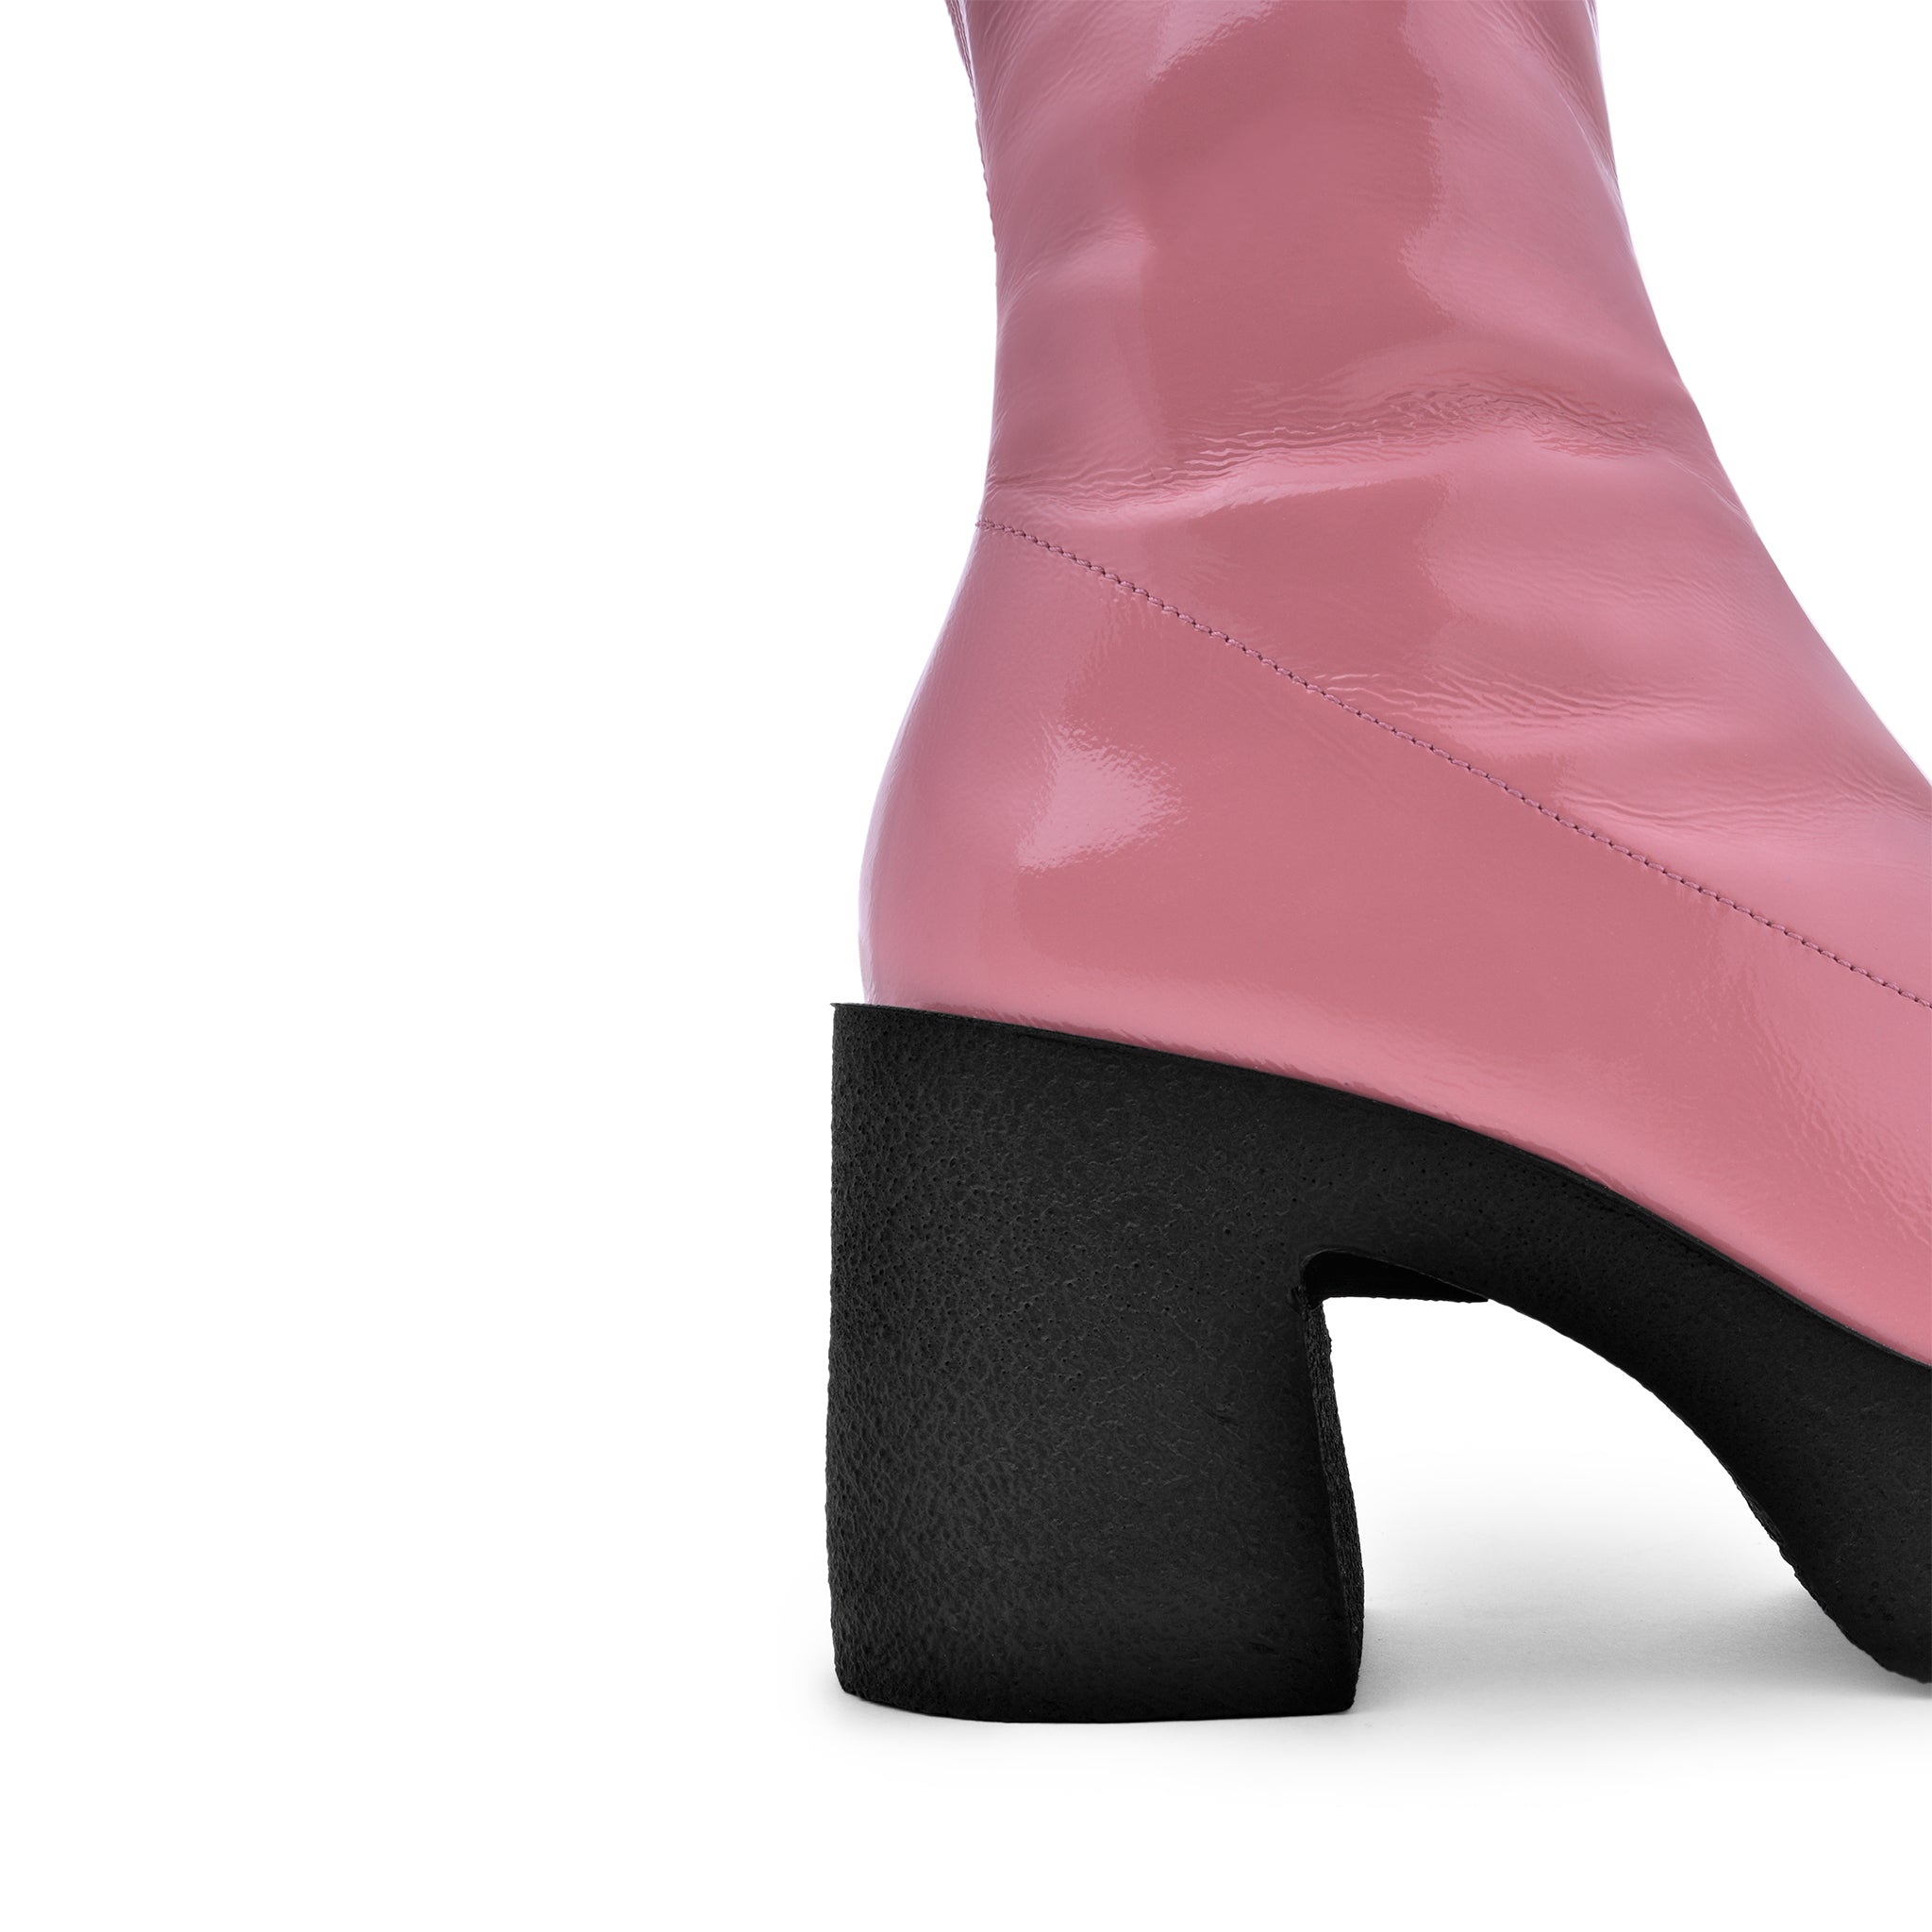 Umi Flamingo Pink Stretch Patent Chunky Ankle Boots 20077-02-16 - 9